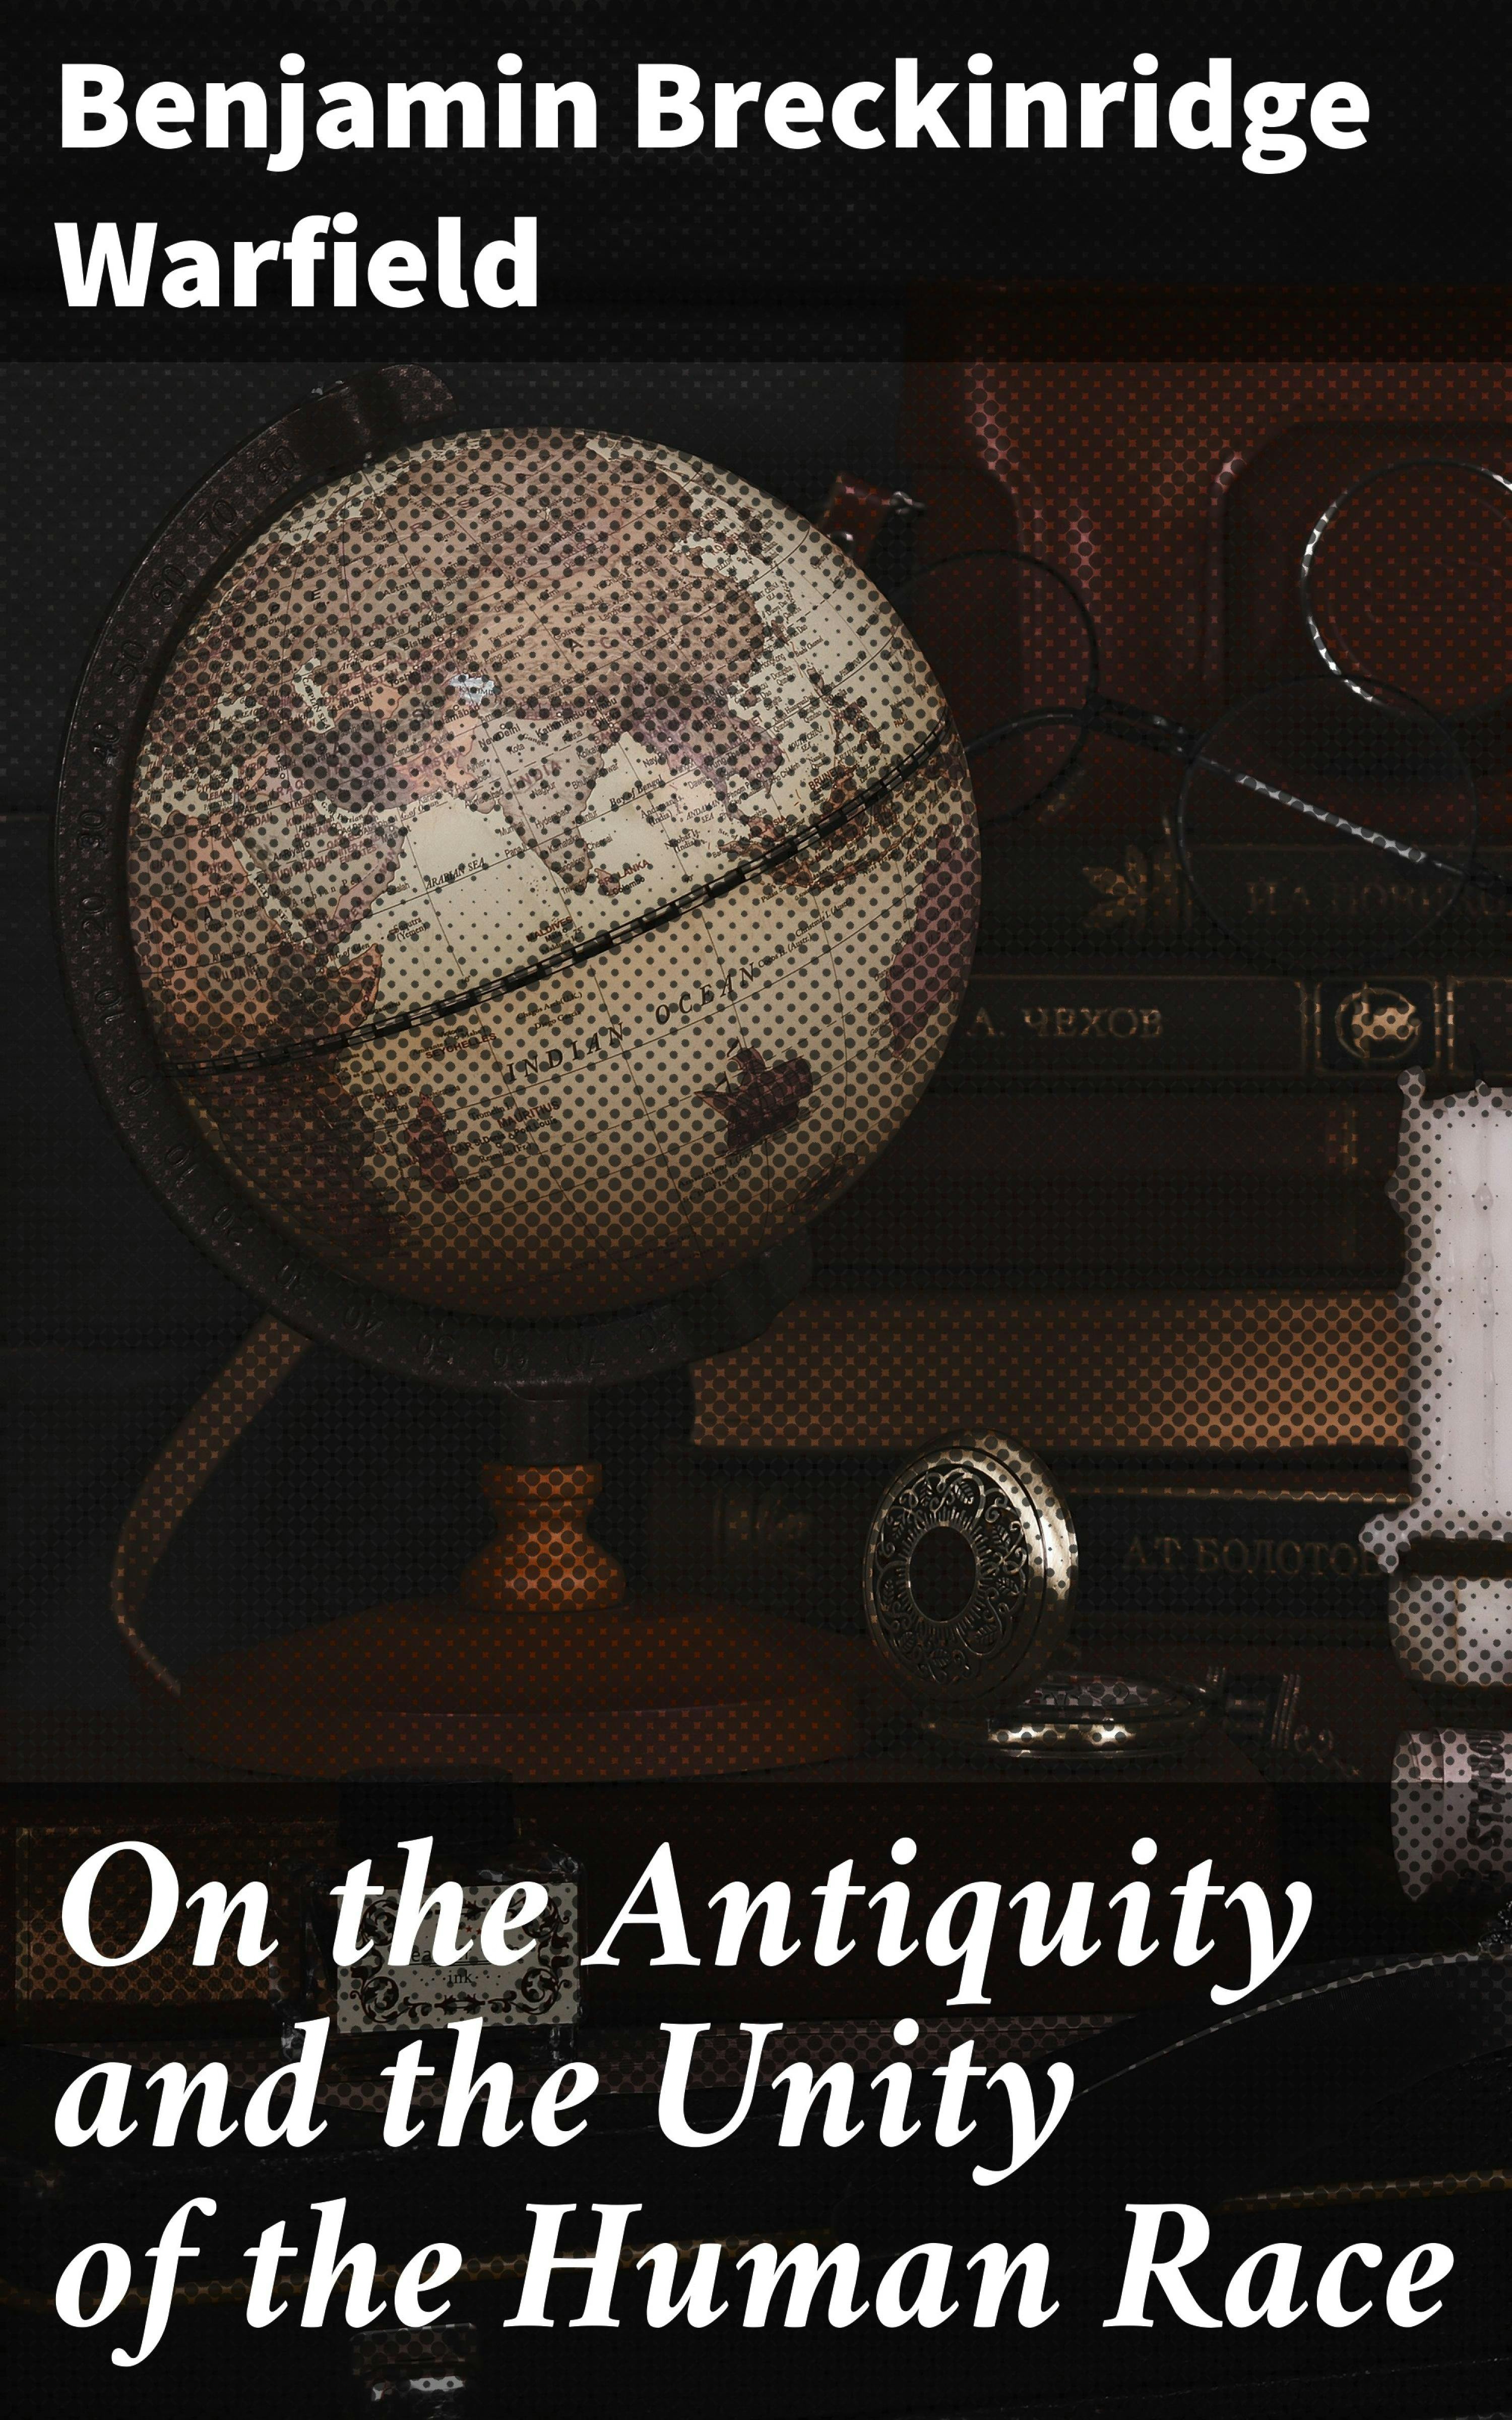 On the Antiquity and the Unity of the Human Race - Benjamin Breckinridge Warfield